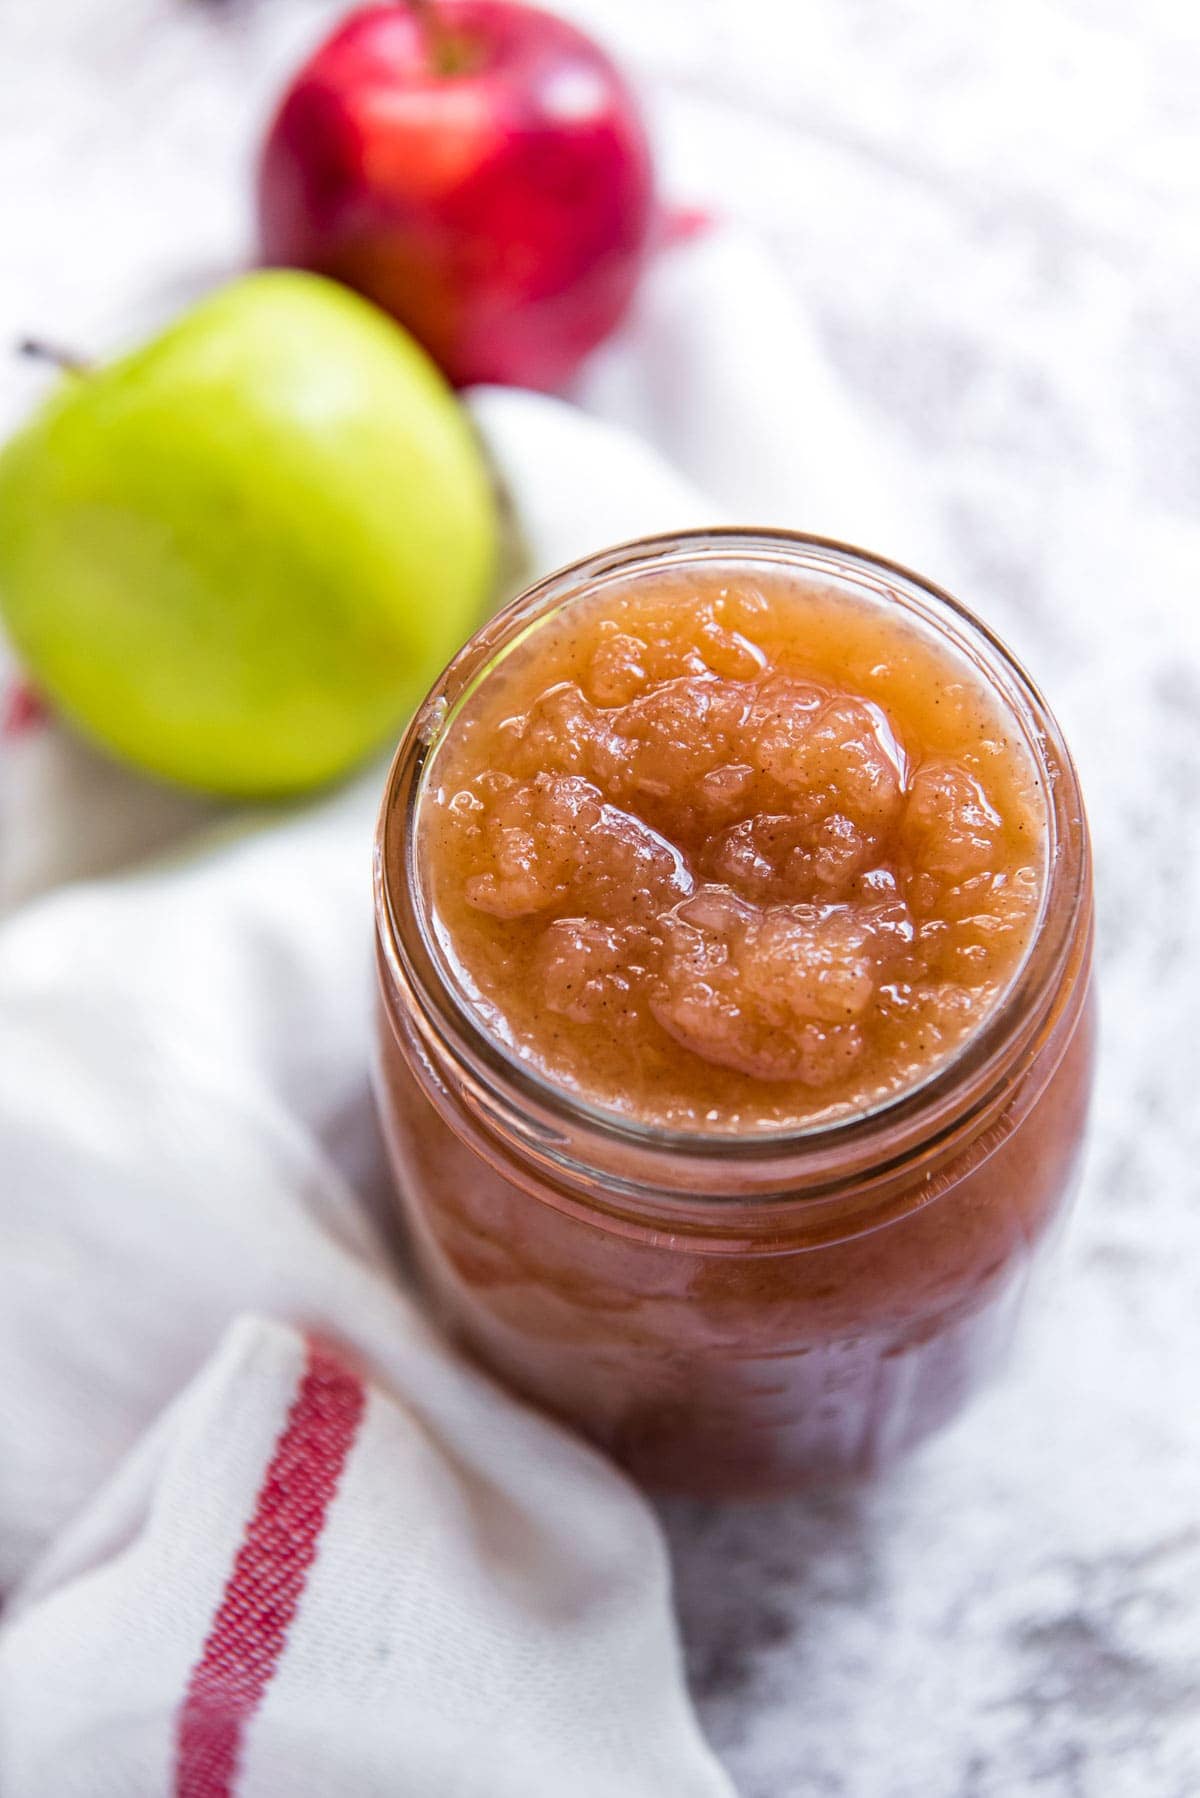 jar of homemade applesauce, white napkins with a red stripe, red apple, green apple